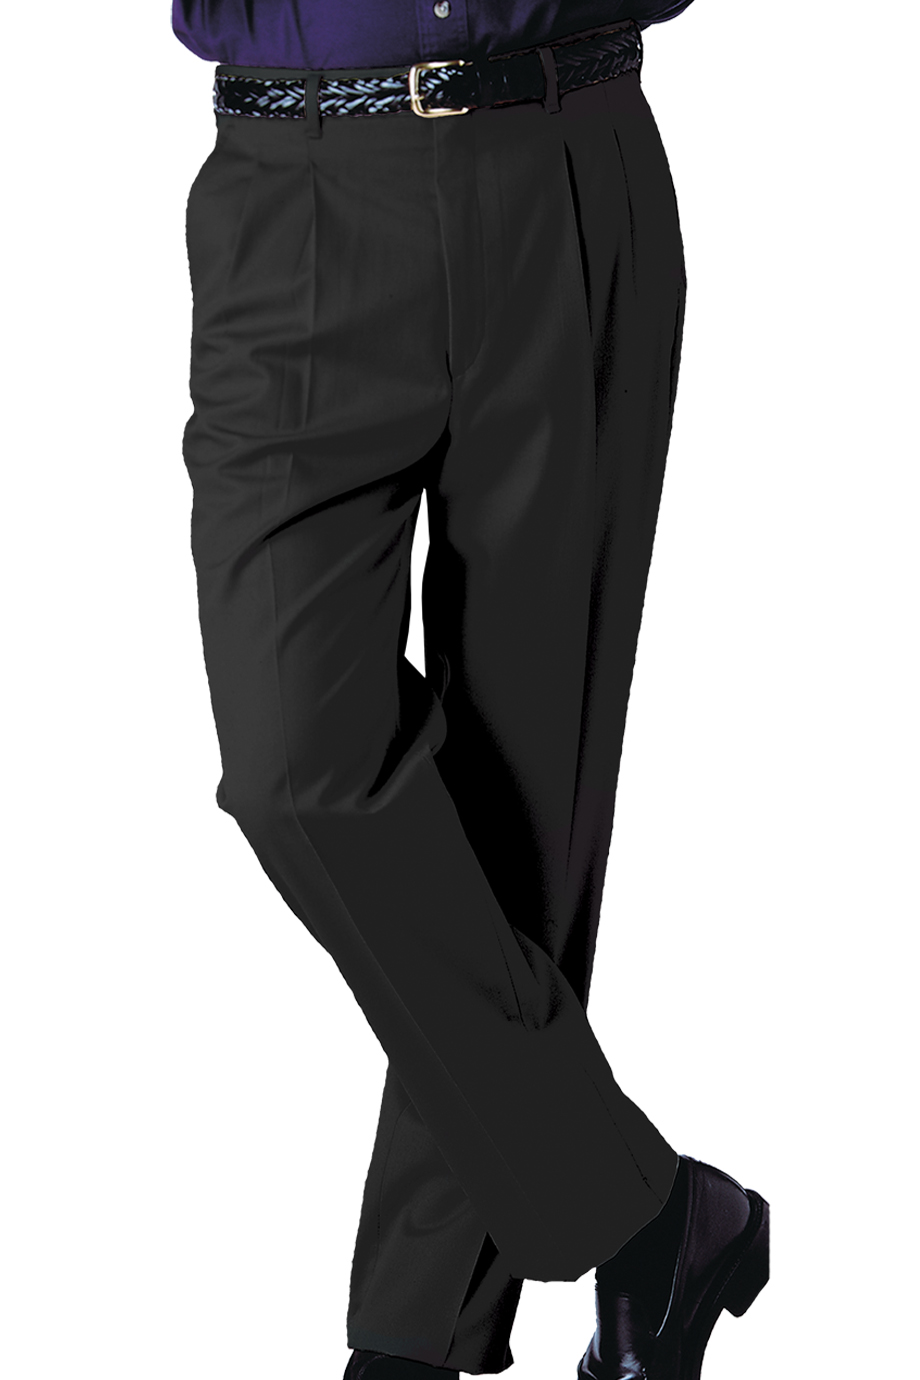 Edwards Big & Tall  Business Casual Pleated Pant